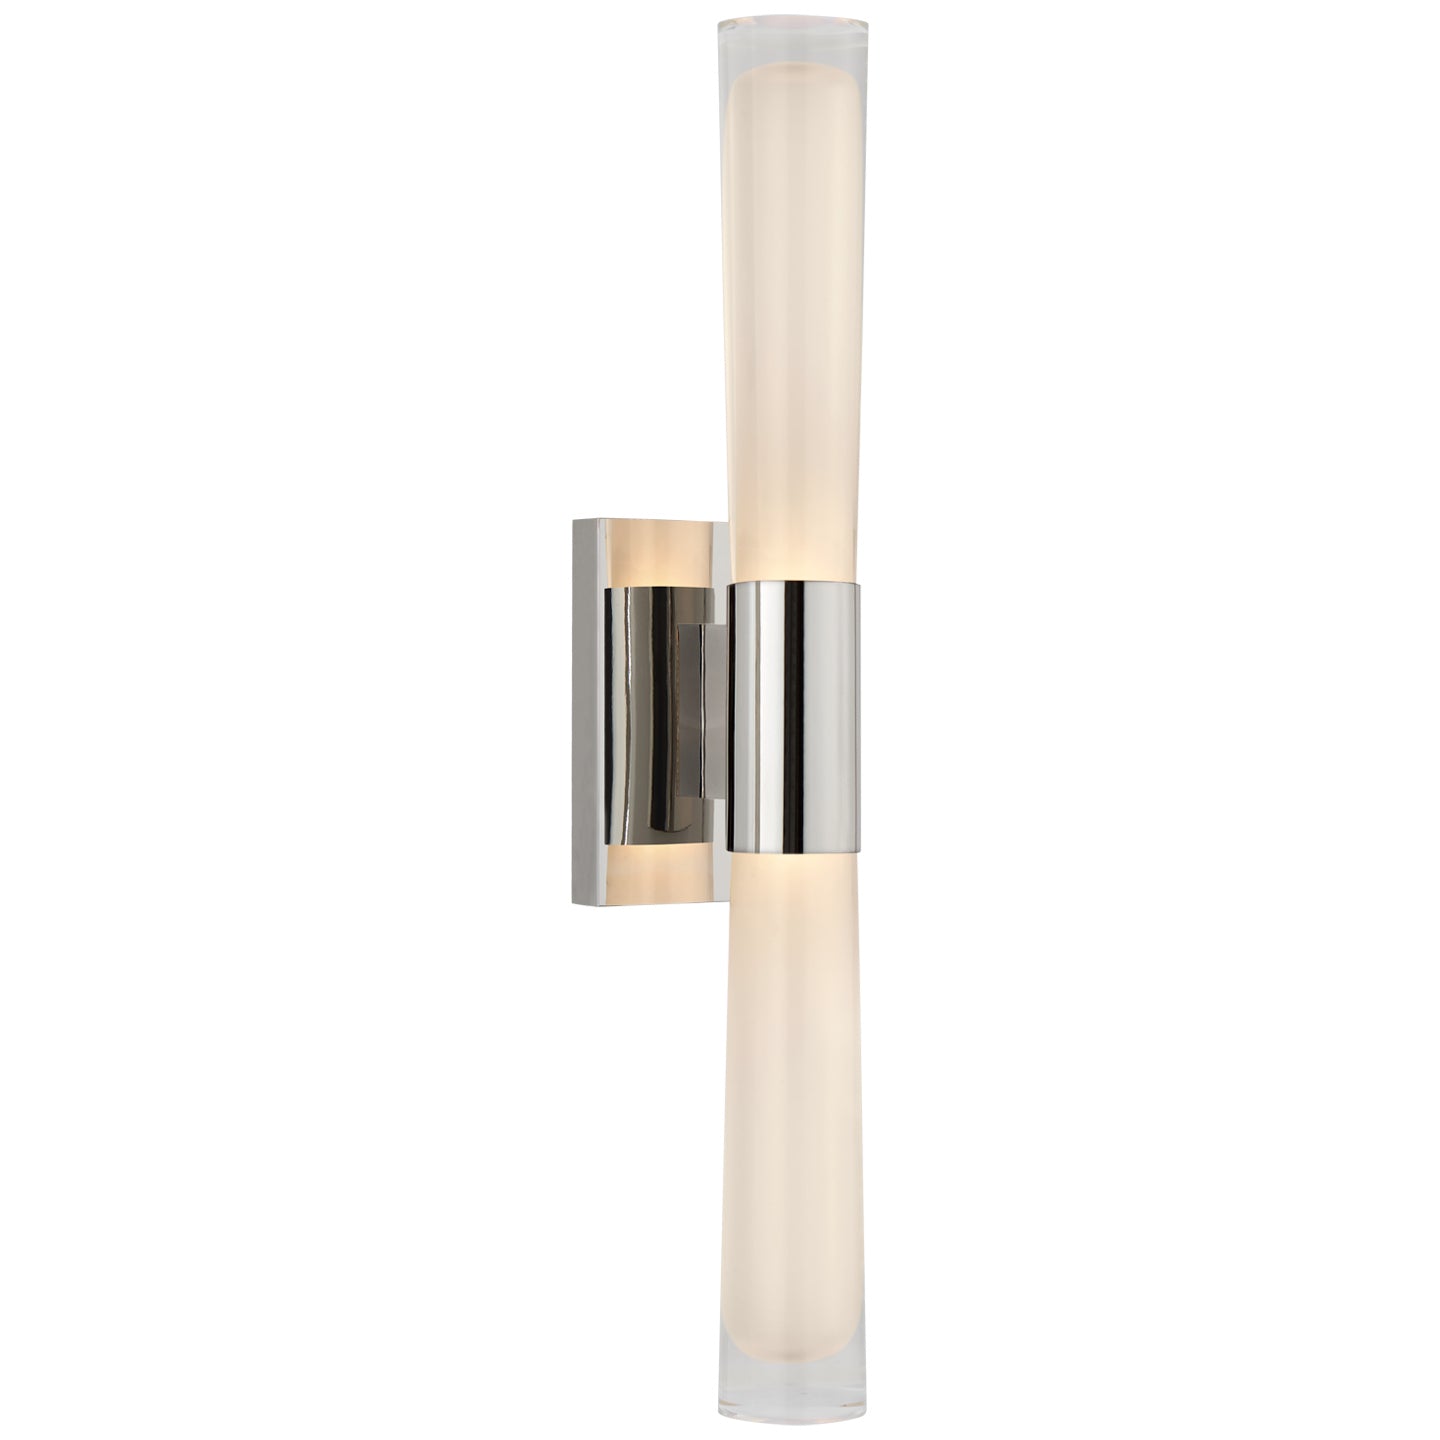 Load image into Gallery viewer, Visual Comfort Signature - ARN 2473PN-CG - LED Wall Sconce - Brenta - Polished Nickel
